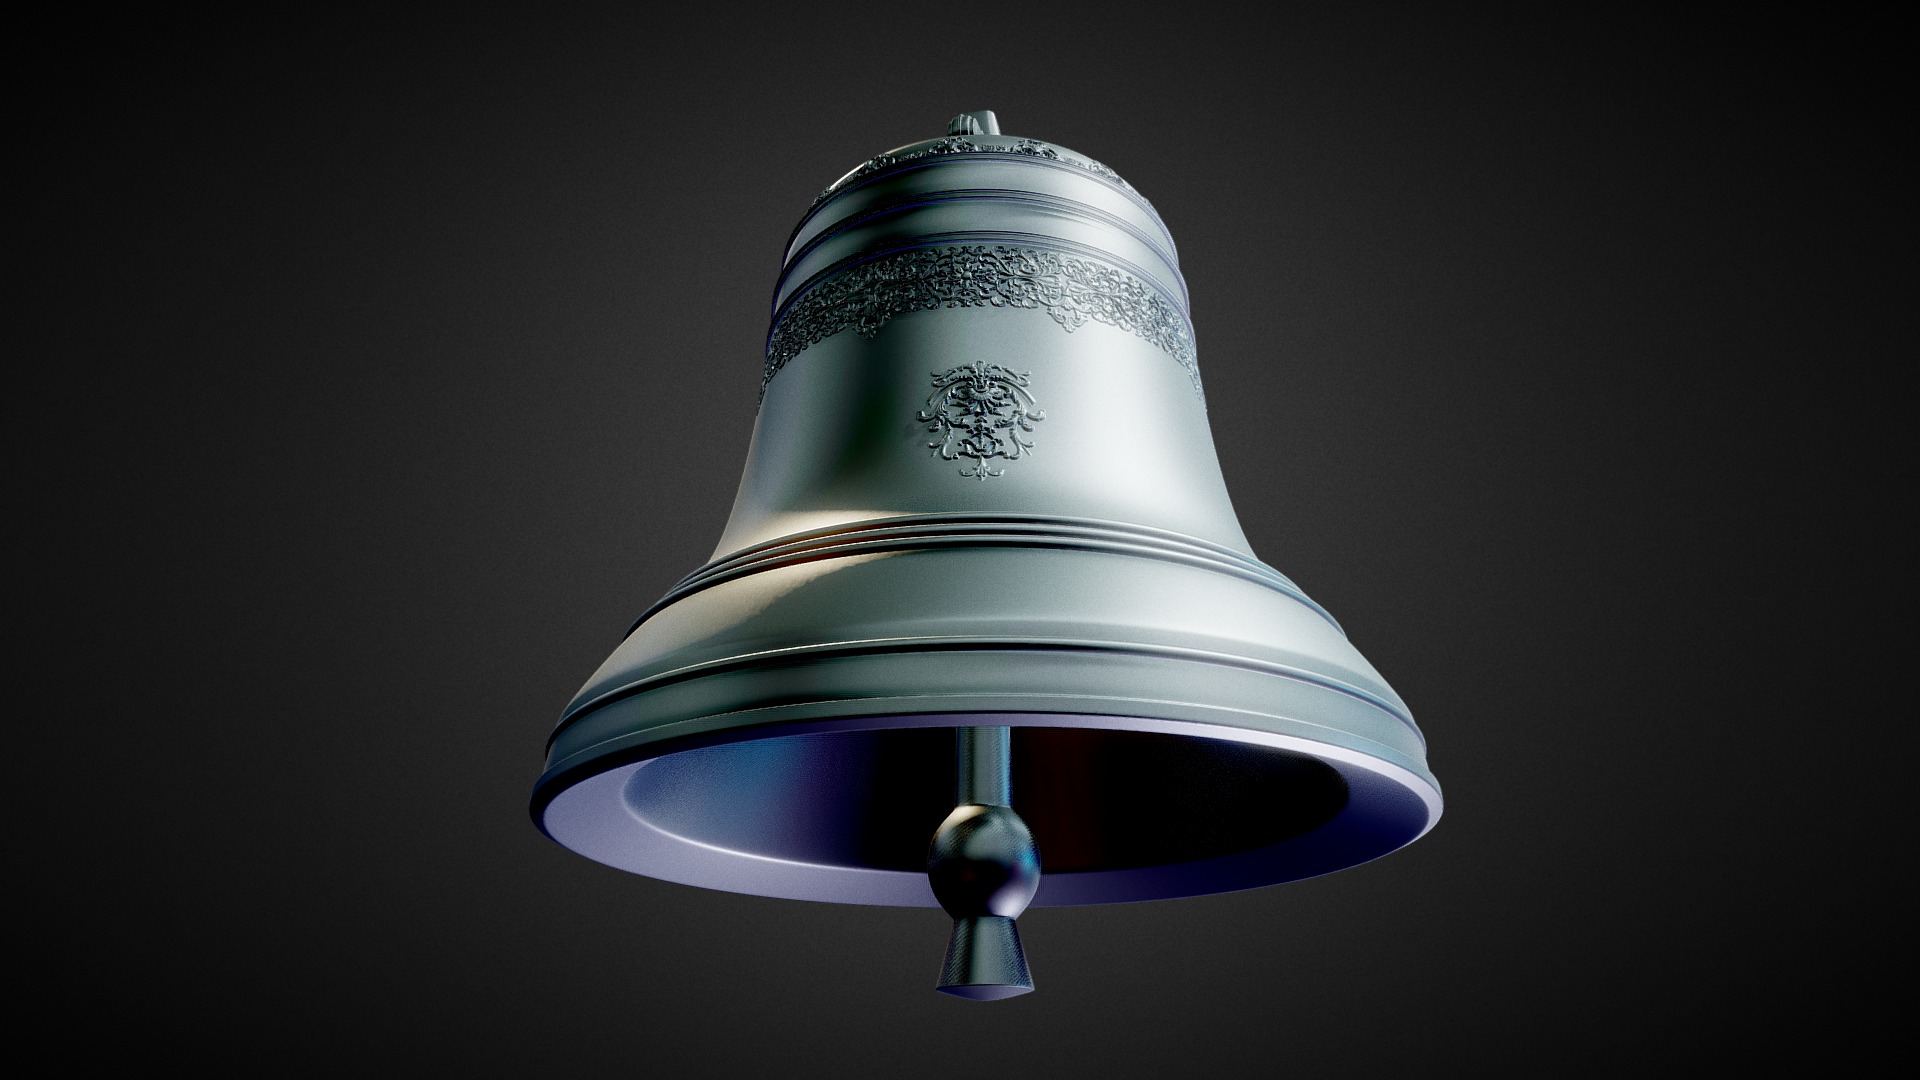 3D model 3D Decorative Bell – High Poly - This is a 3D model of the 3D Decorative Bell - High Poly. The 3D model is about a glass with a blue liquid.